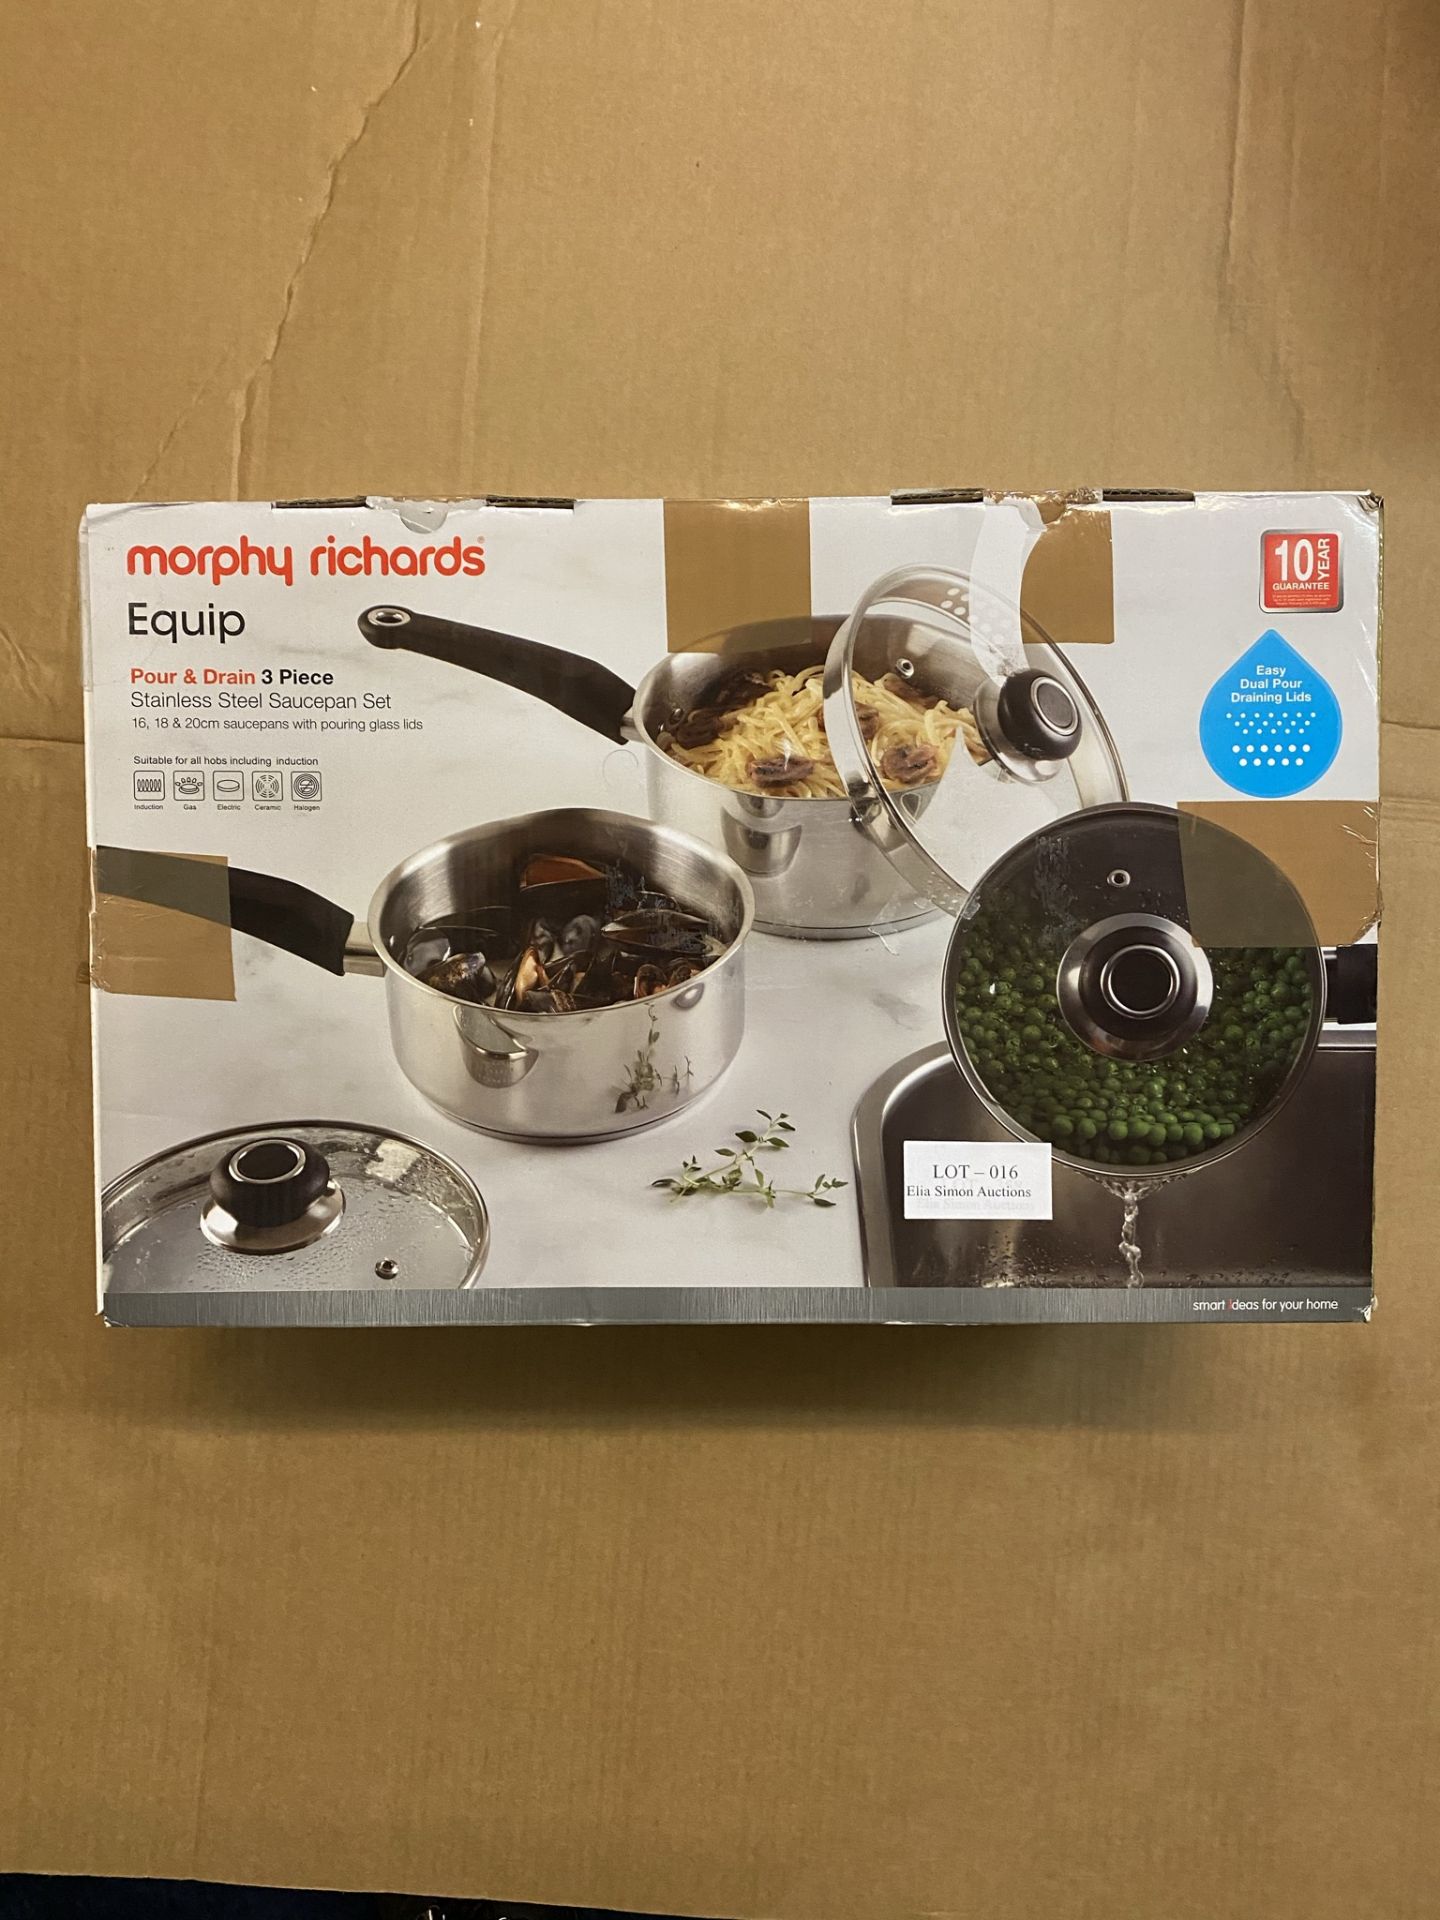 MORPHY RICHARDS EQUIP POUR AND DRAIN 3 PIECE STAINLESS STEEL SAUCEPAN SET